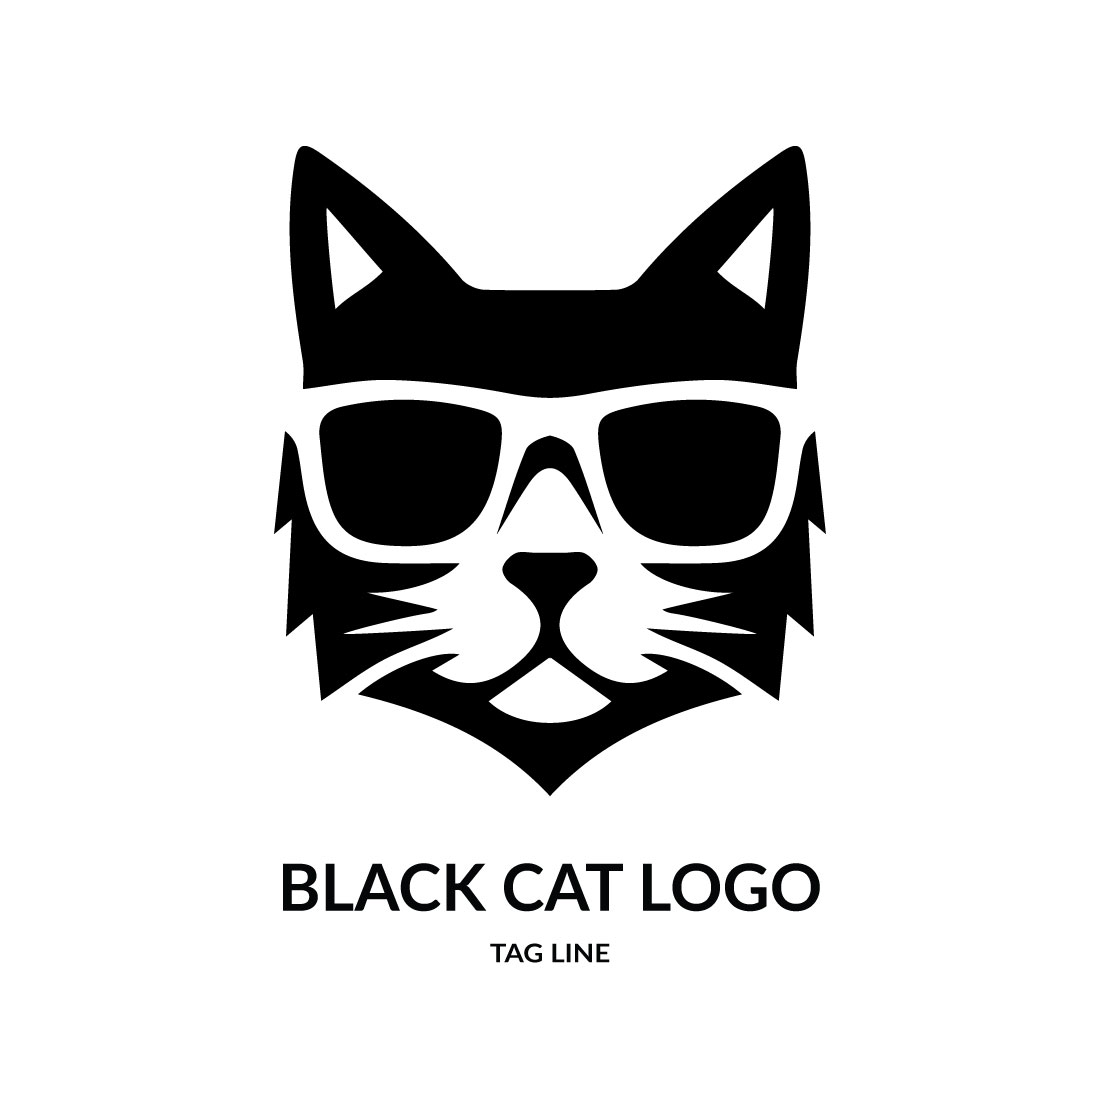 Black cat Icons in SVG, PNG, AI to Download